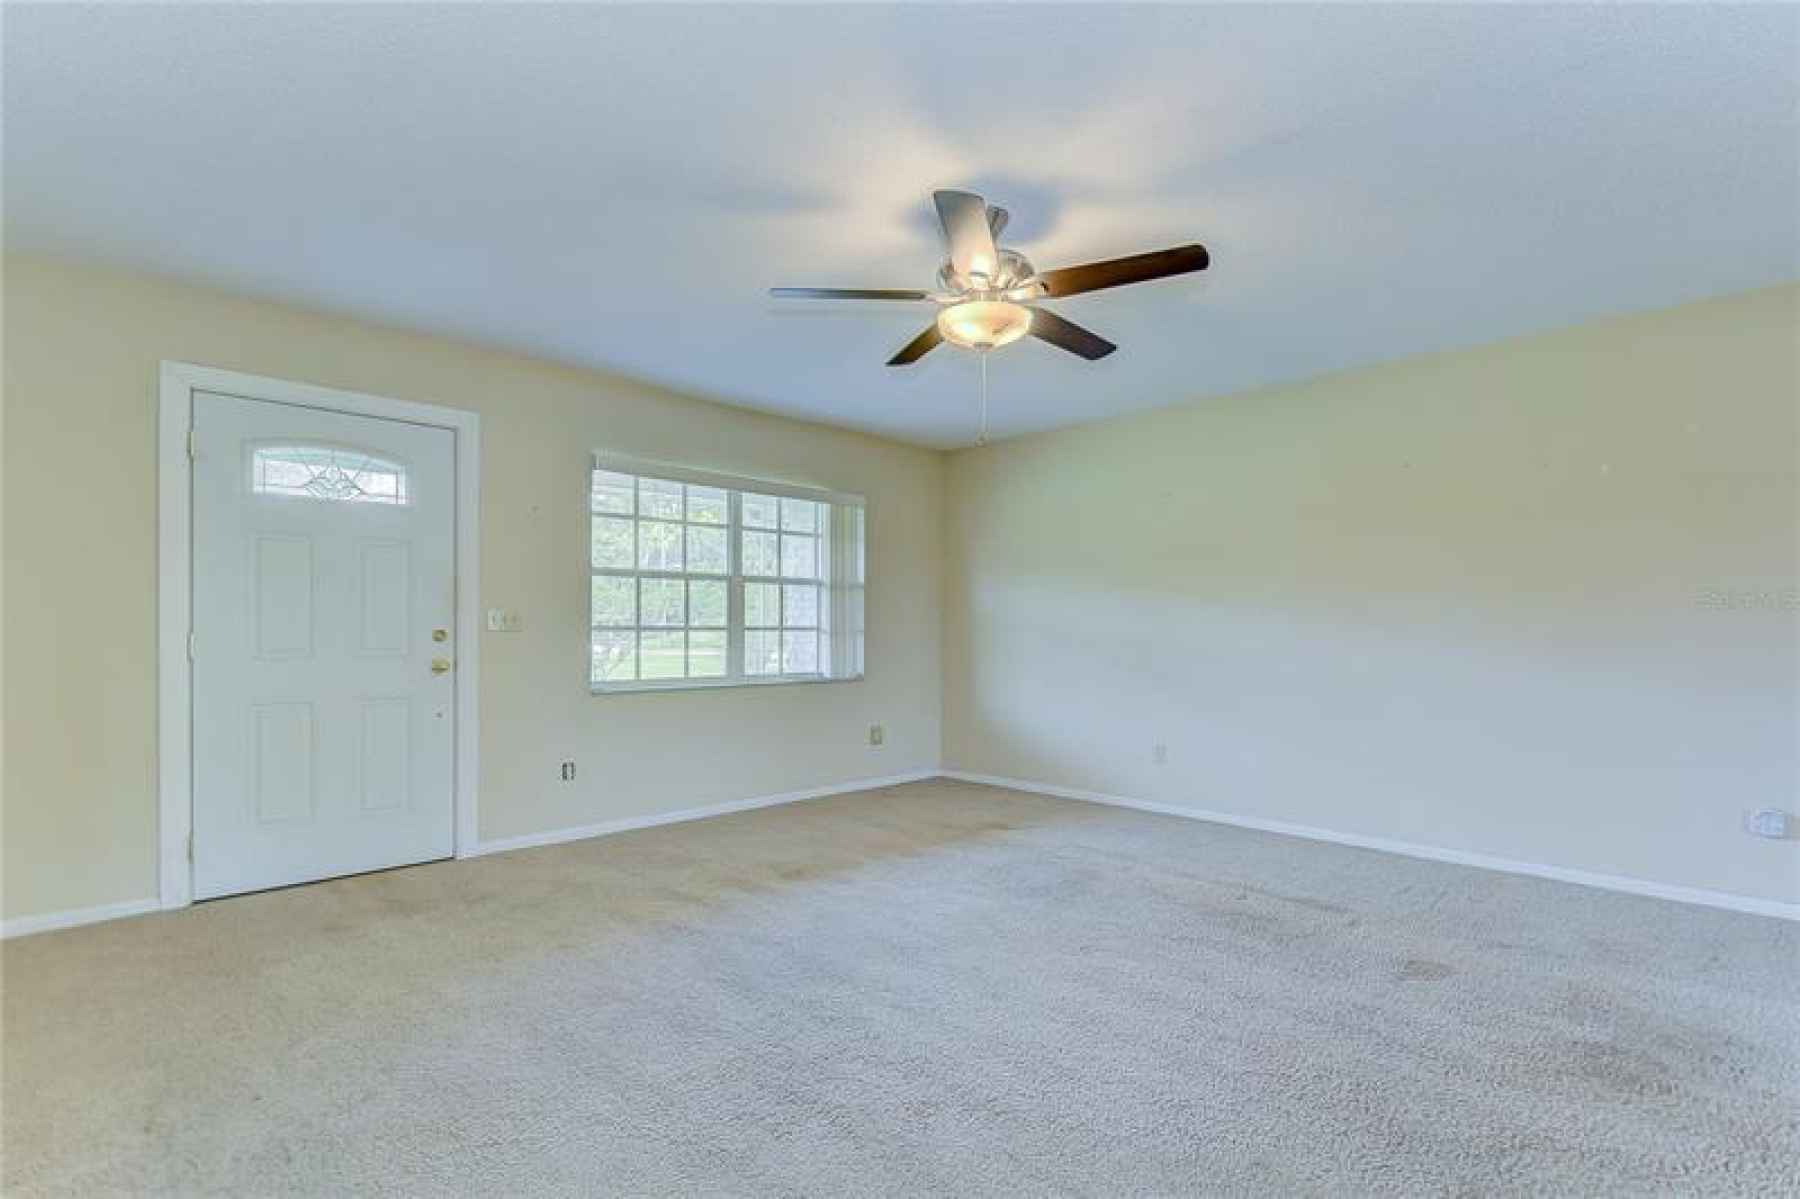 Step through the front door into the spacious great room!